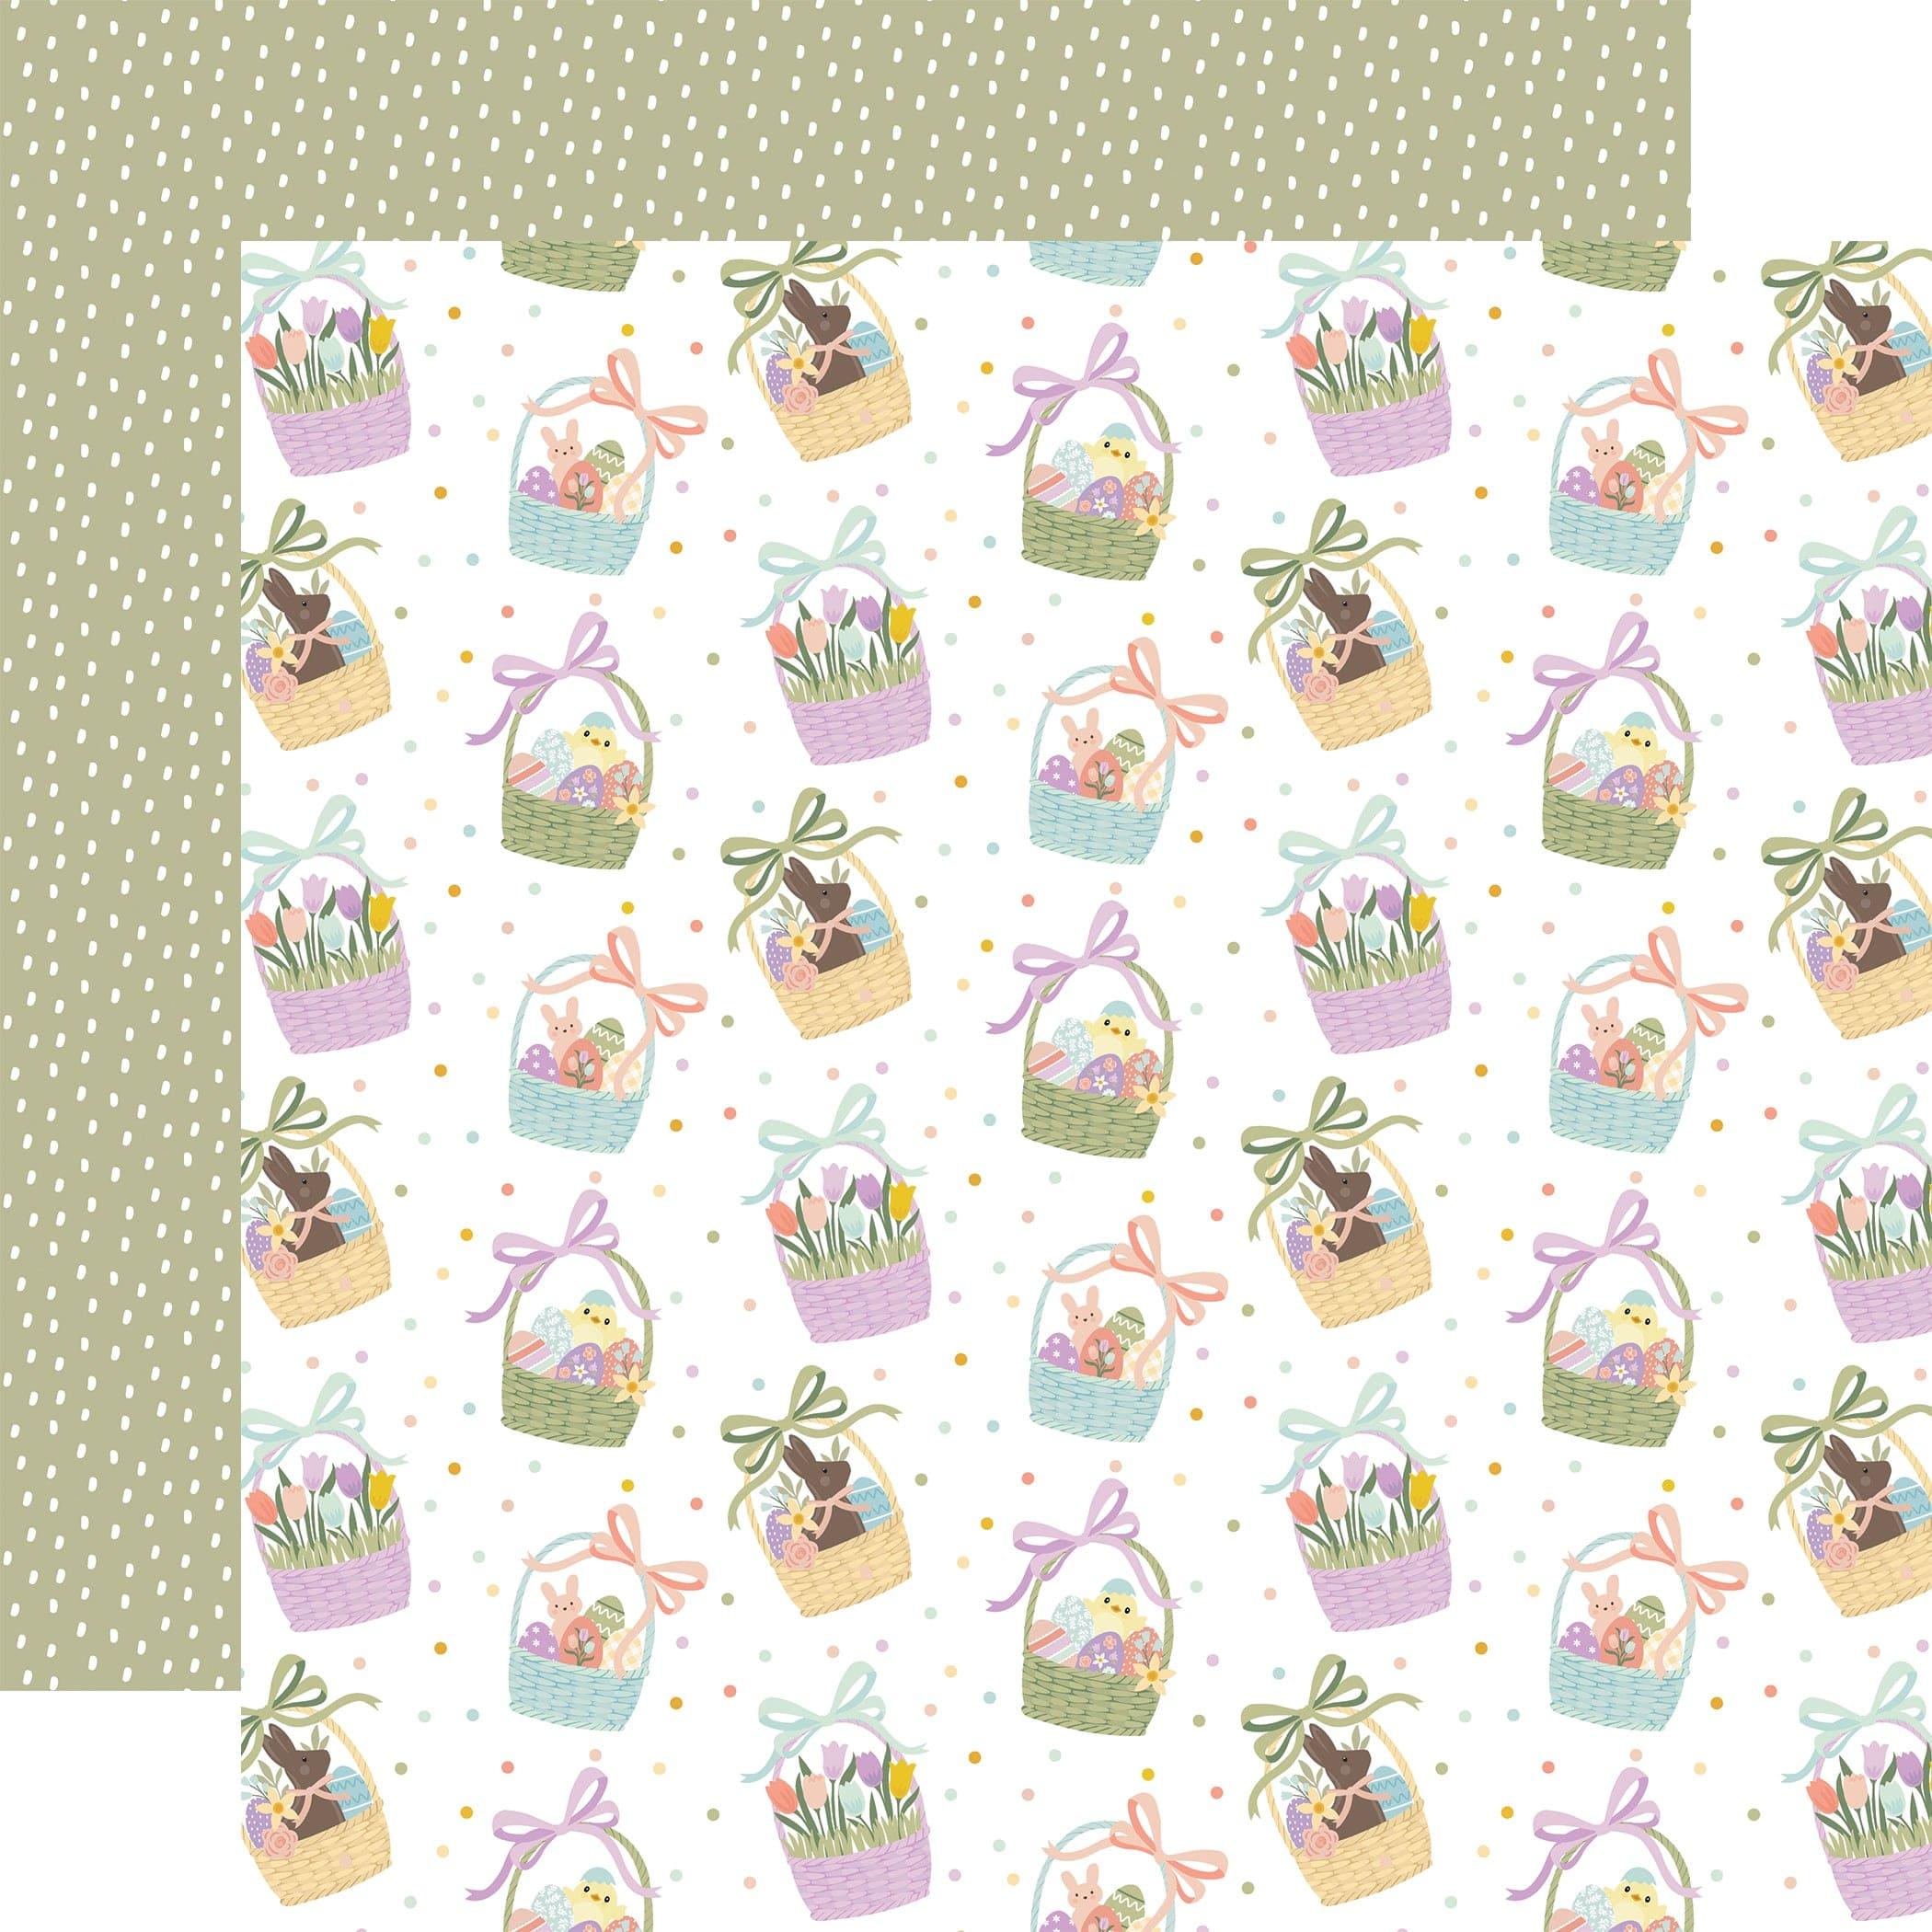 It's Easter Time Collection Egg Hunt Finds 12 x 12 Double-Sided Scrapbook Paper by Echo Park Paper - Scrapbook Supply Companies